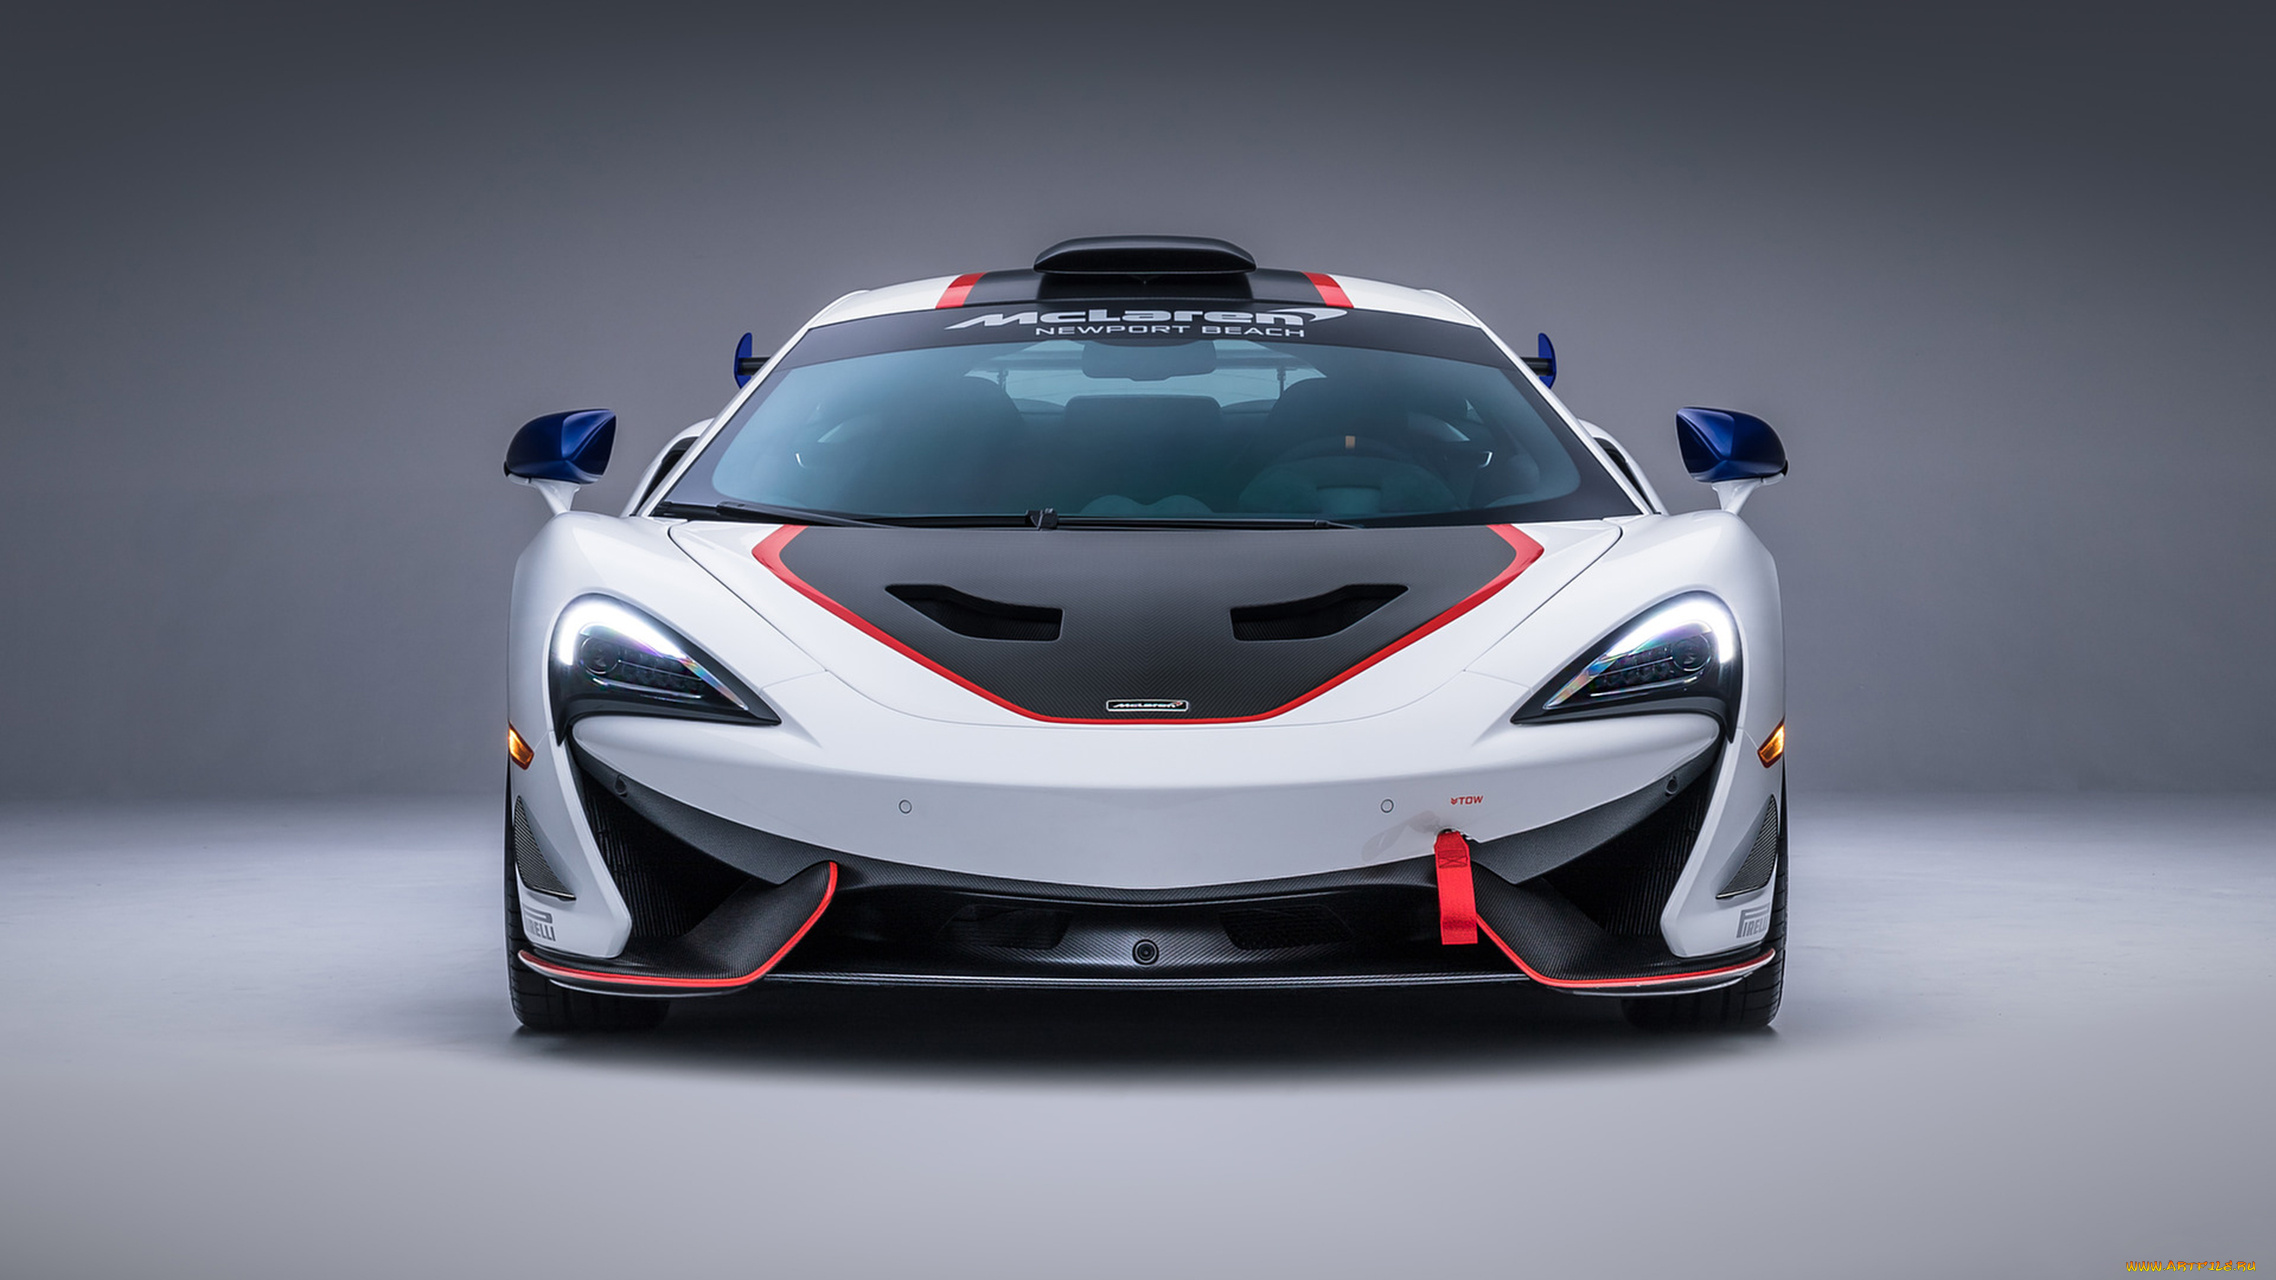 mclaren, 570s, gt4-mso, x, no8, white, red, and, blue, accents, 2018, автомобили, mclaren, 570s, gt4-mso, x, no8, white, red, blue, accents, 2018